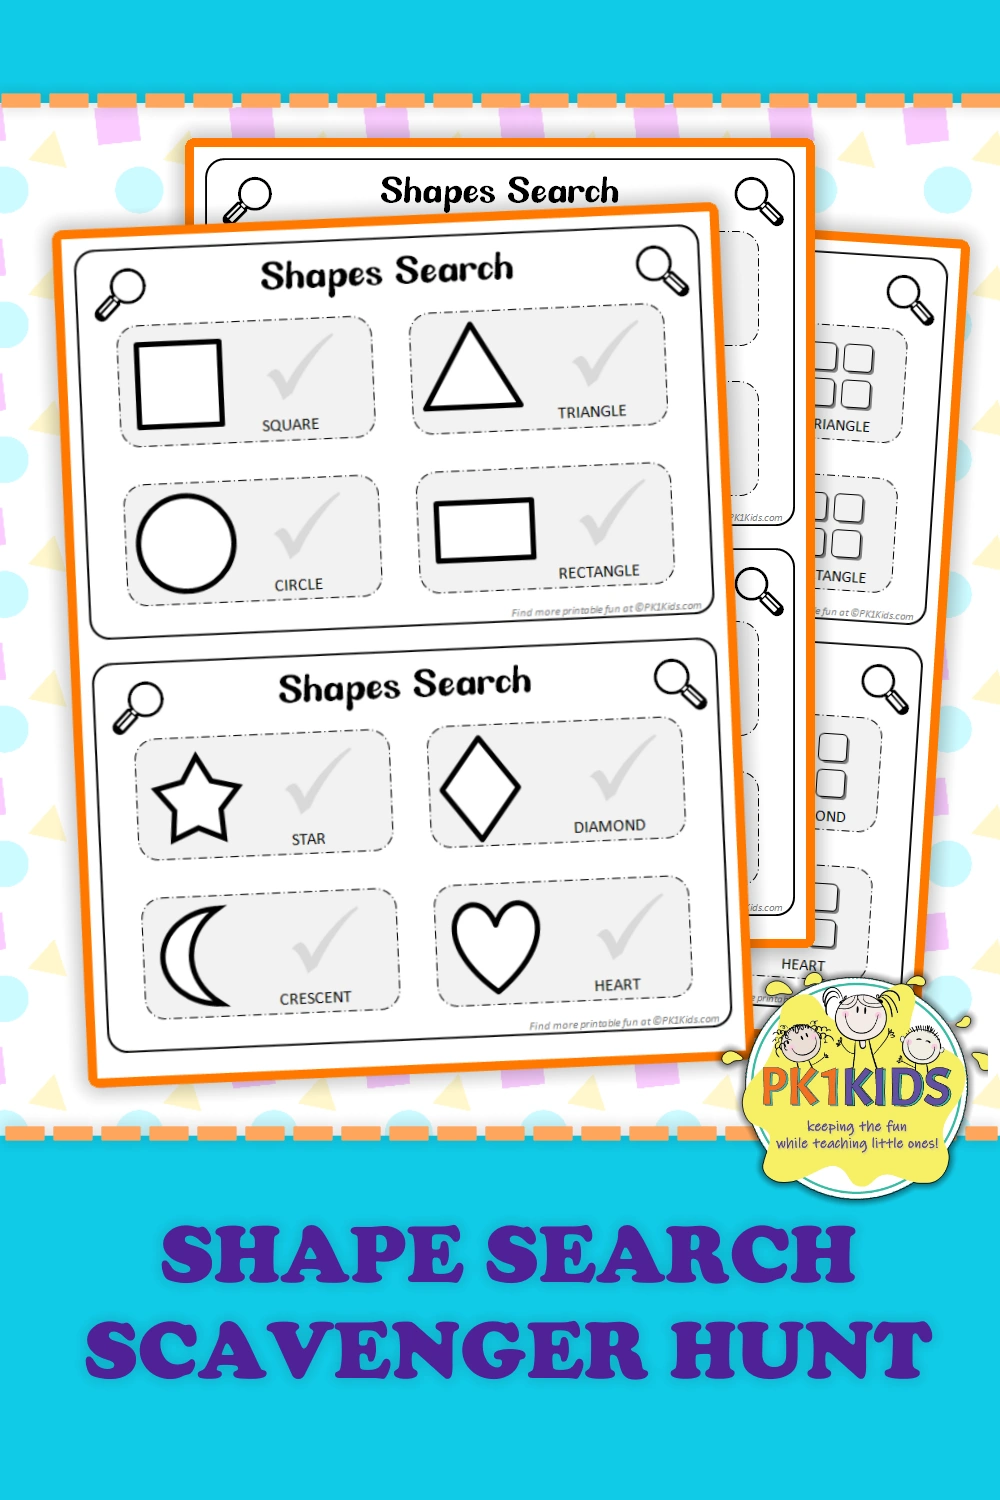 shapes search scavenger hunt free printable